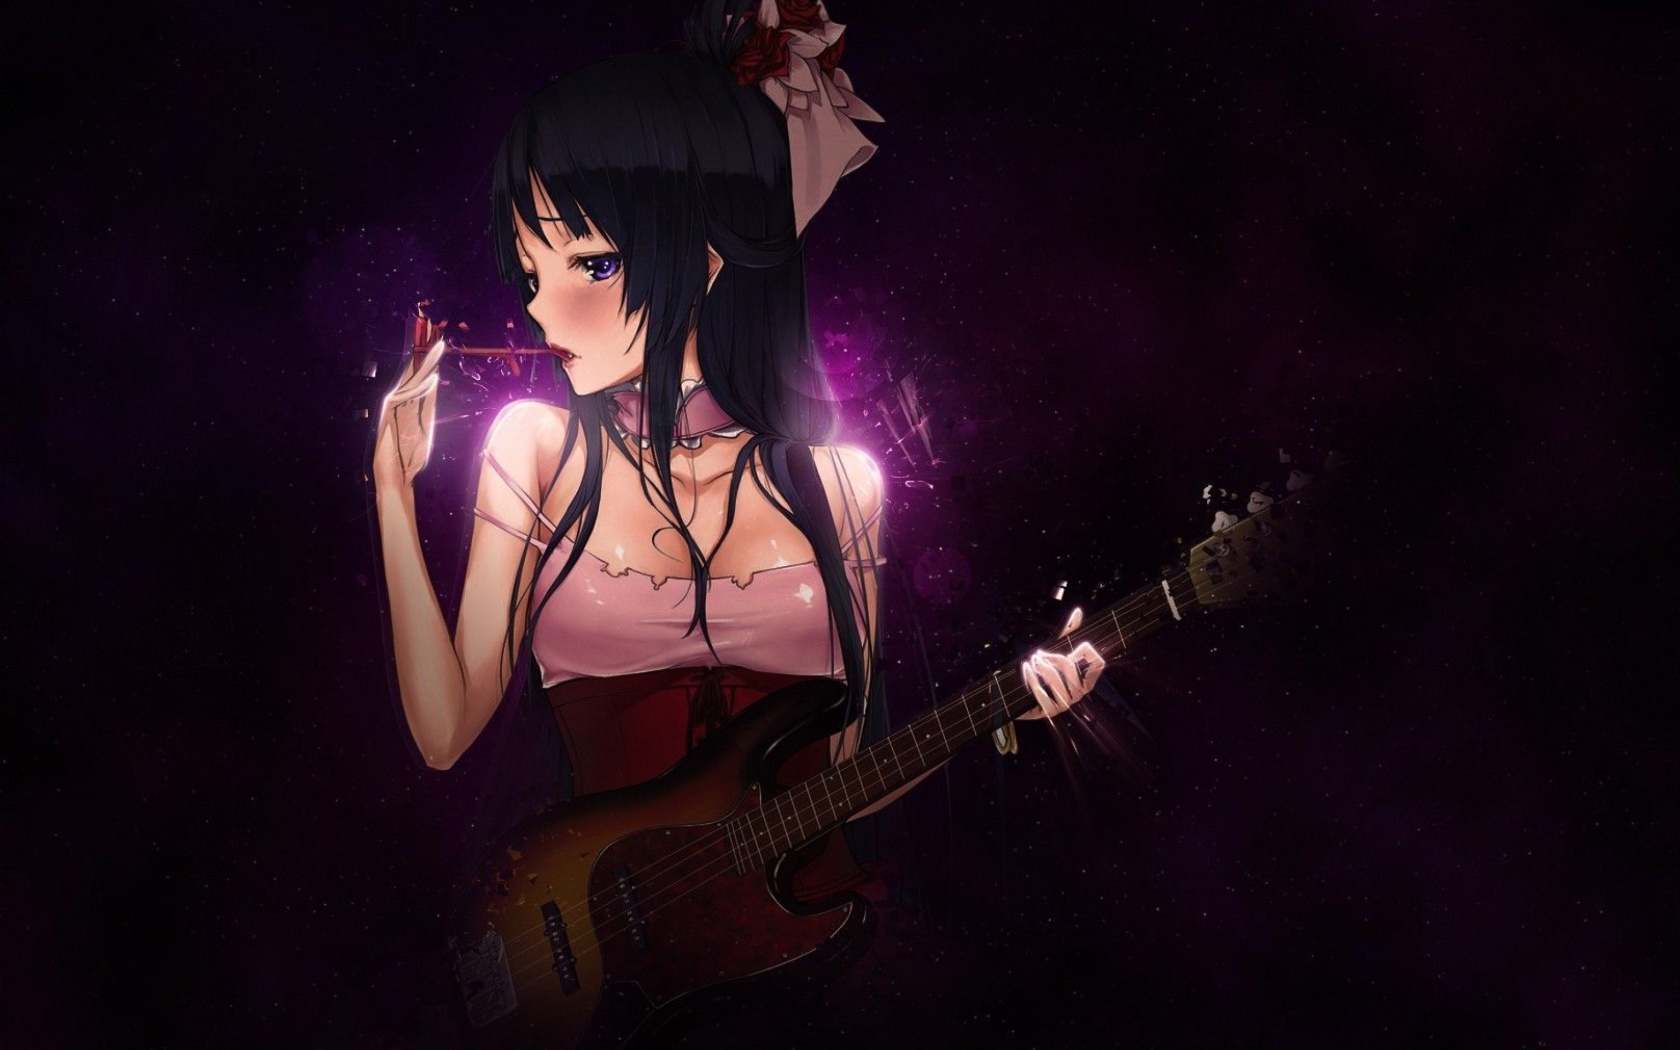 Anime Girl with Guitar wallpaper 1680x1050